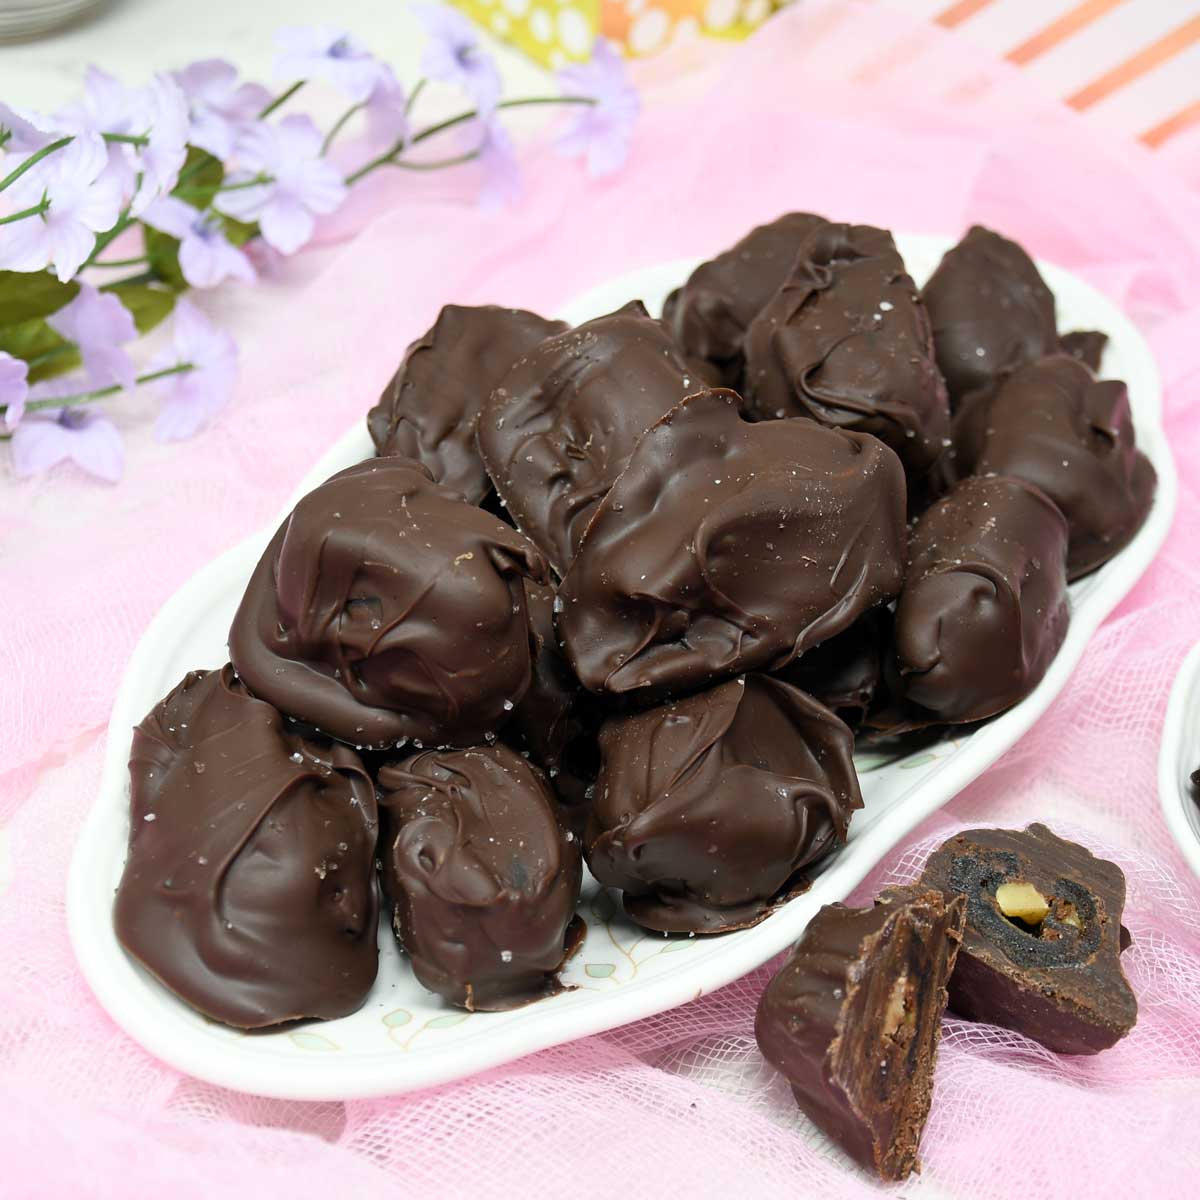 Chocolate covered dates served on a plate.